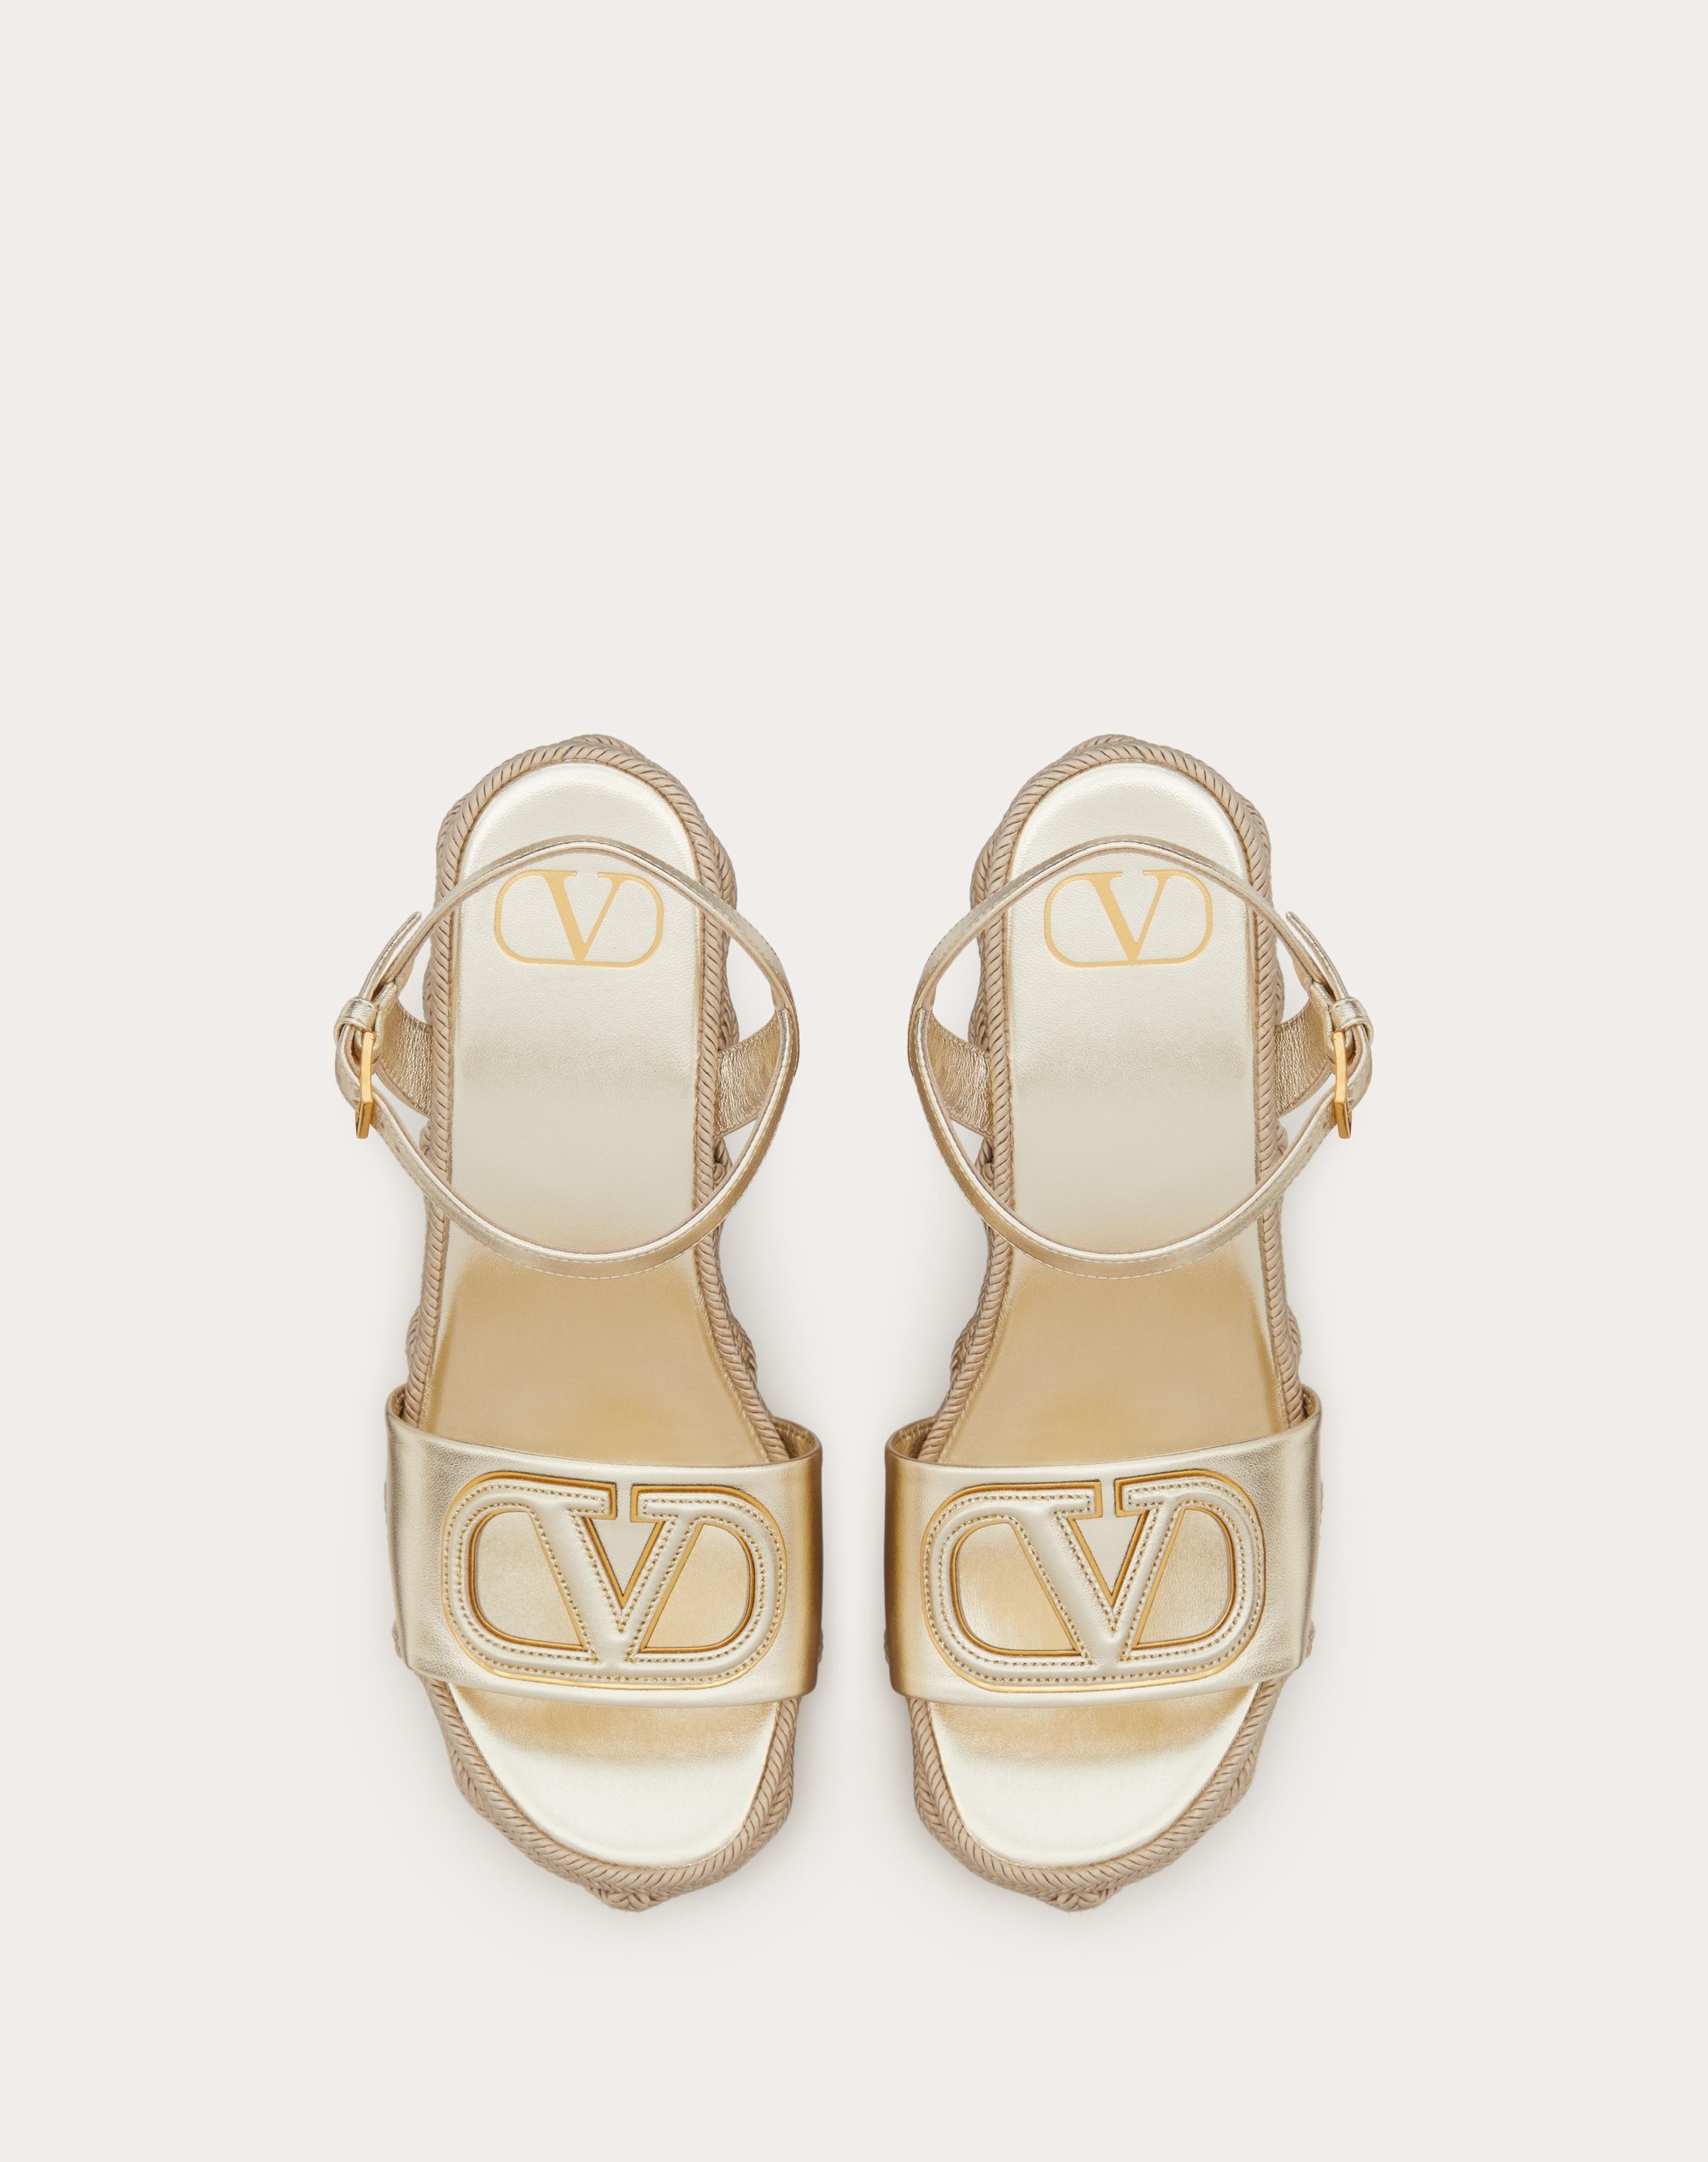 VLOGO CUT-OUT WEDGE SANDAL IN LAMINATED NAPPA LEATHER 110MM - 4